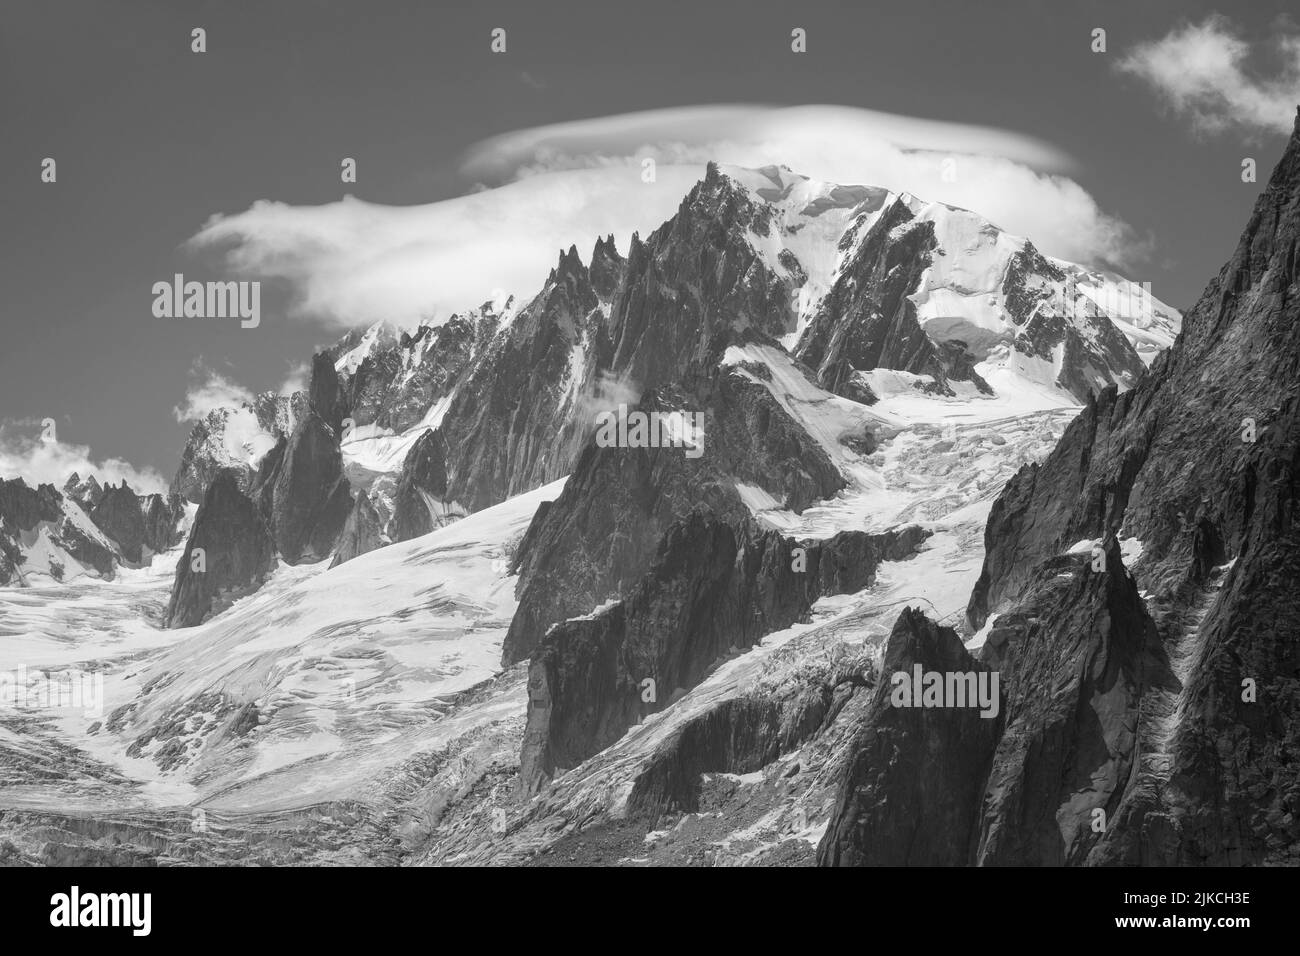 The Mont Blanc du Tacul and Mont Blanc massif. Stock Photo